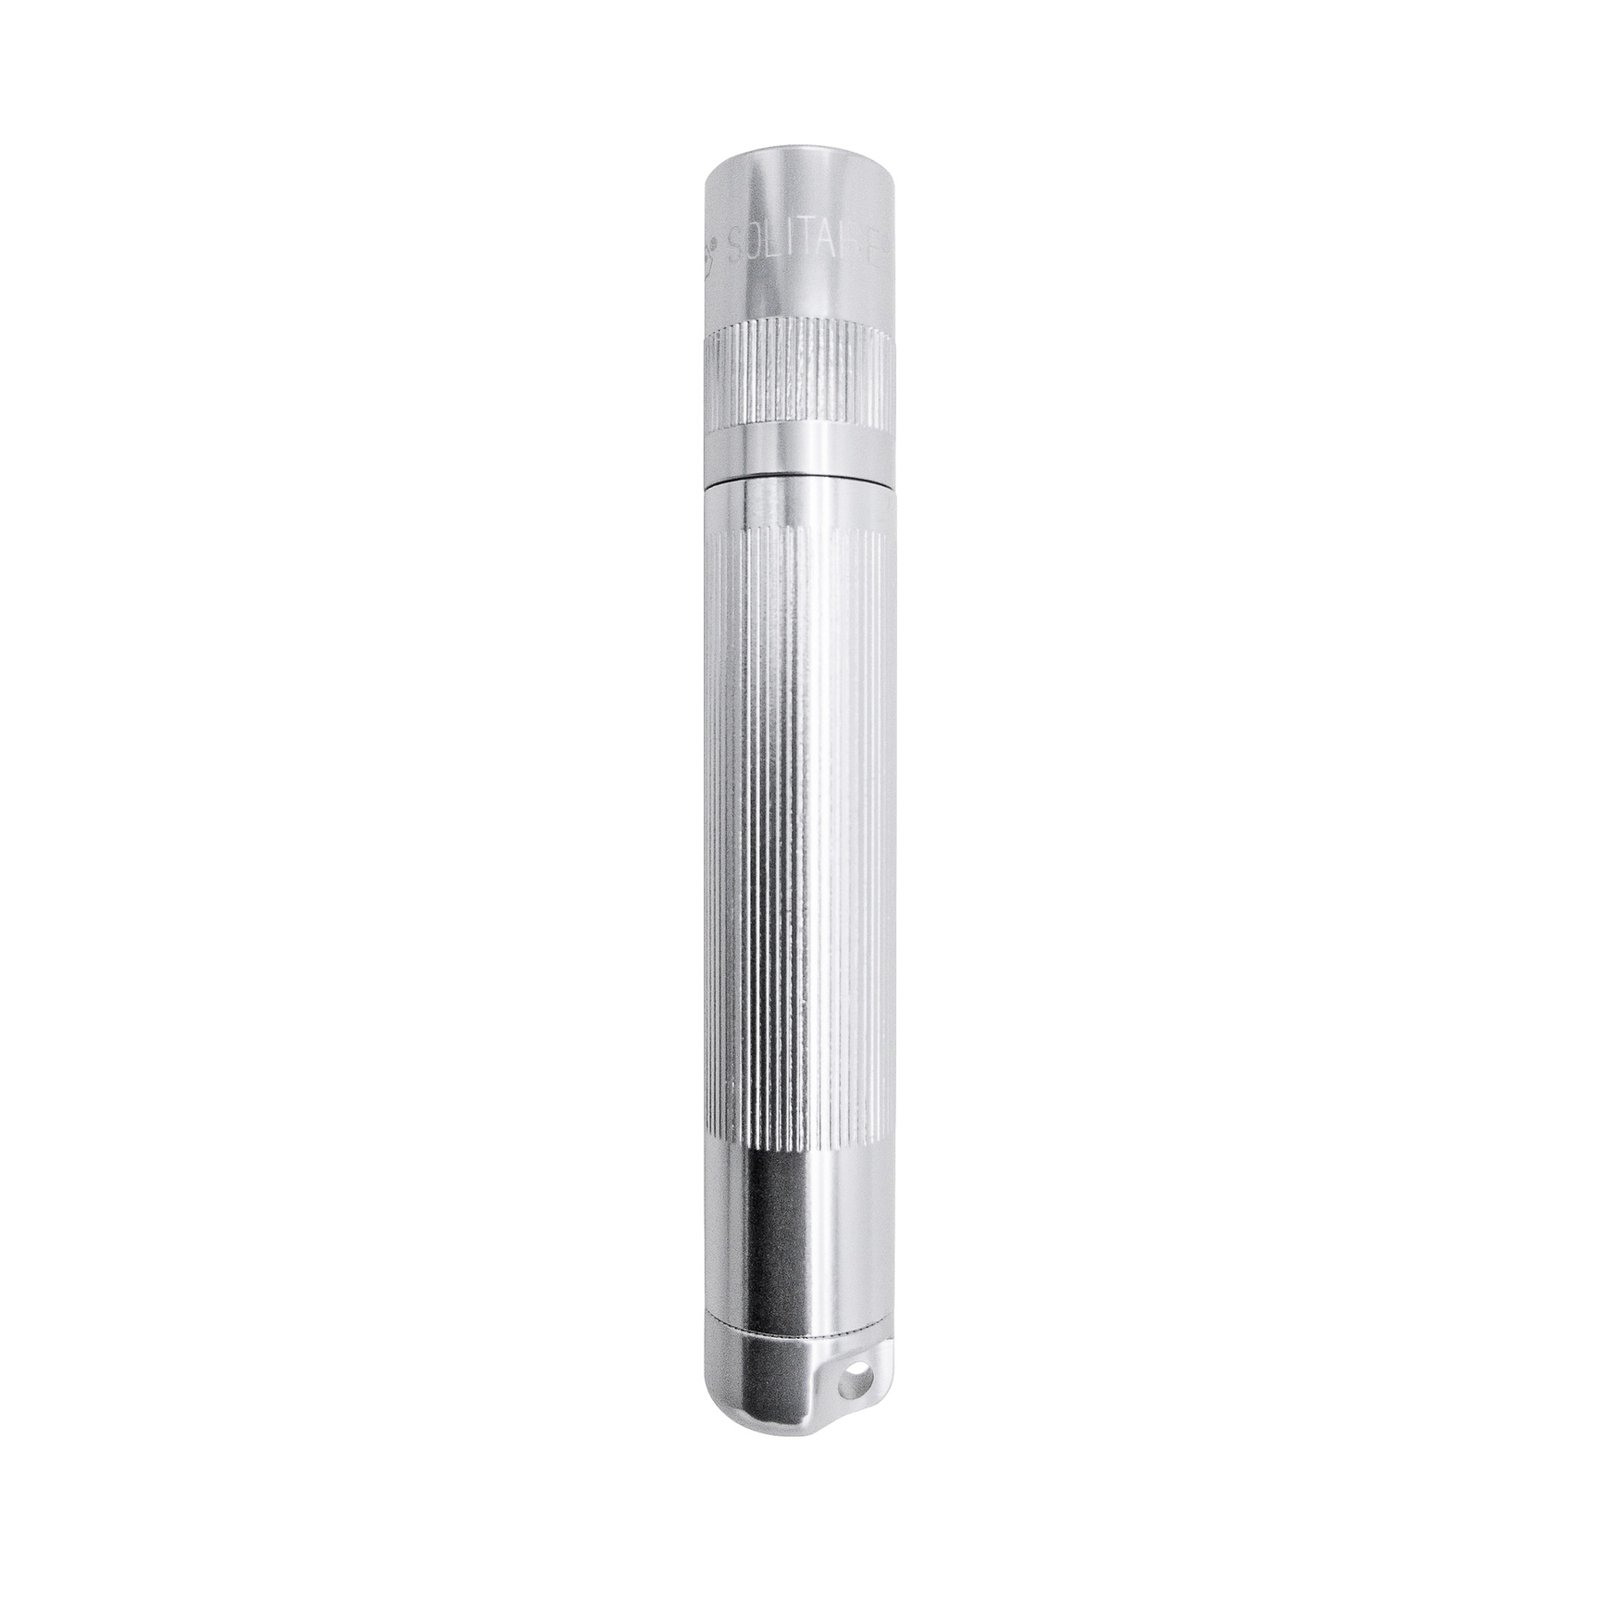 Maglite Xenon torch Solitaire 1-Cell AAA, Boxer, silver